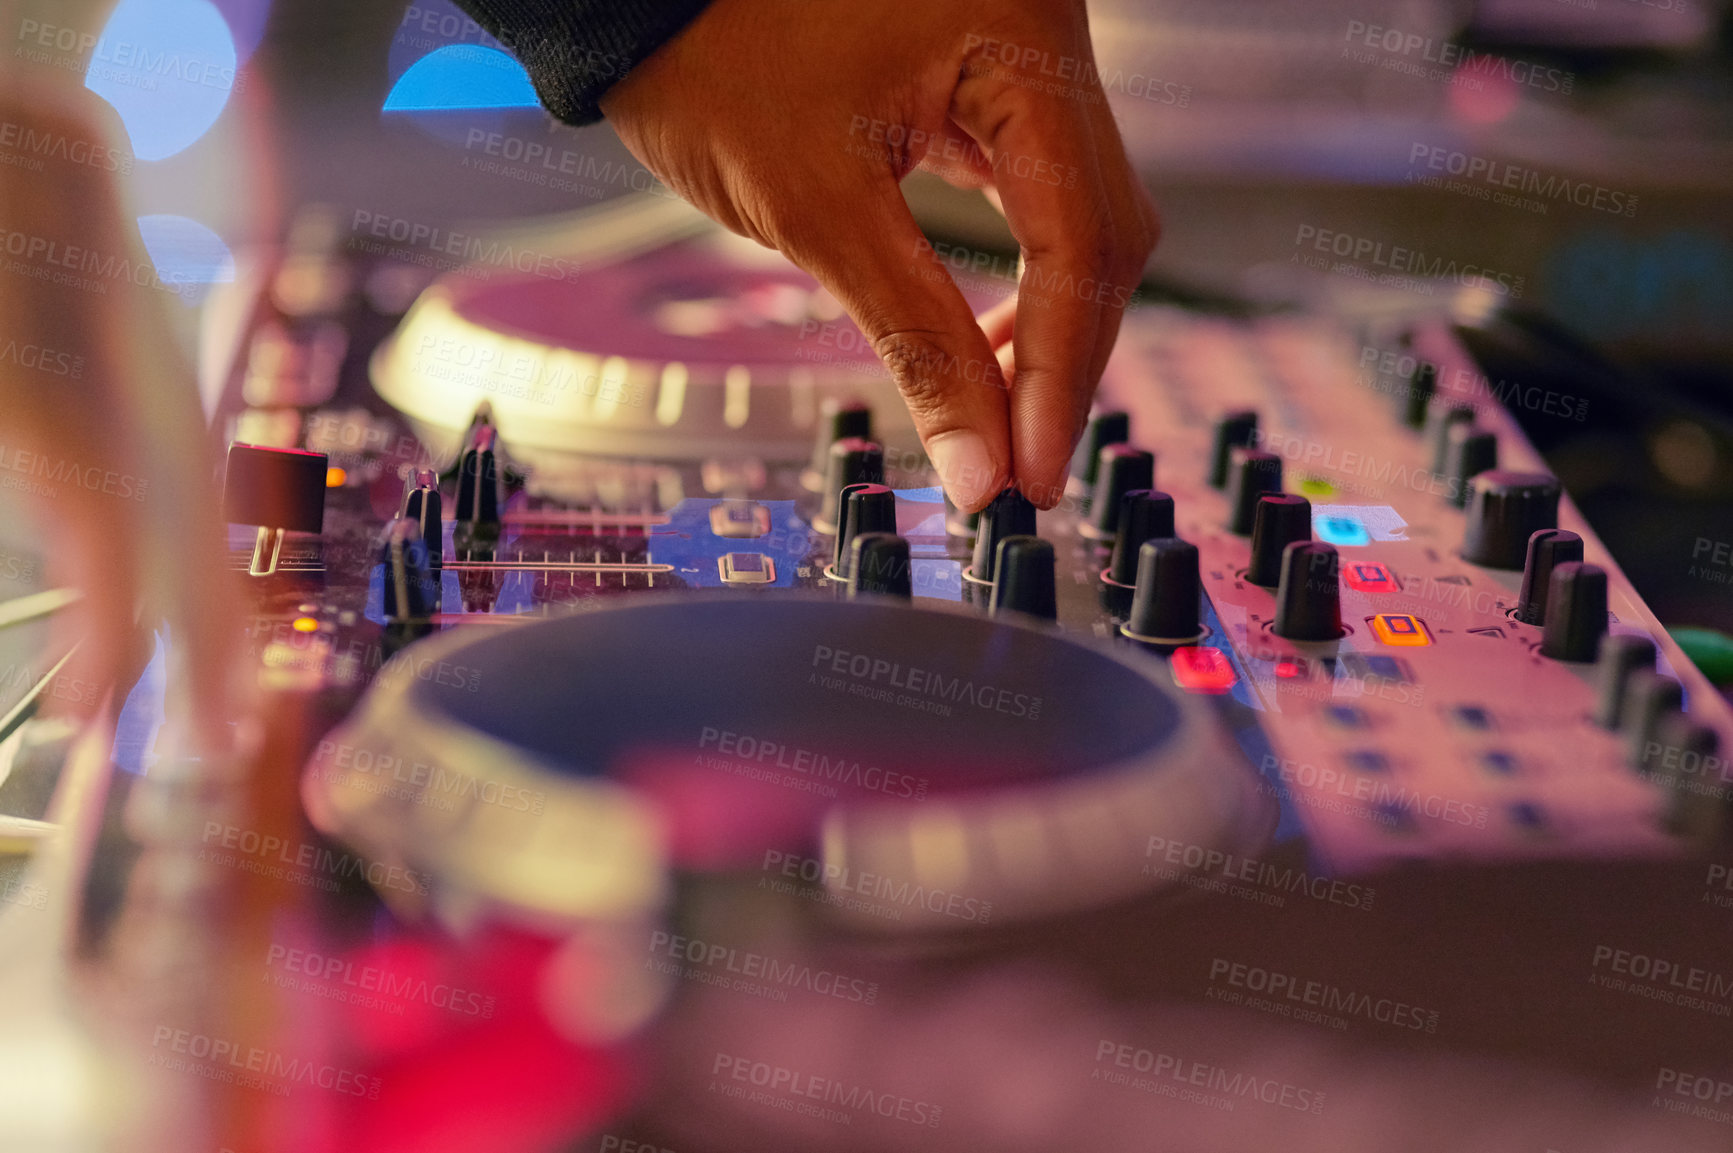 Buy stock photo Closeup shot of a DJ  mixing music on a turntable